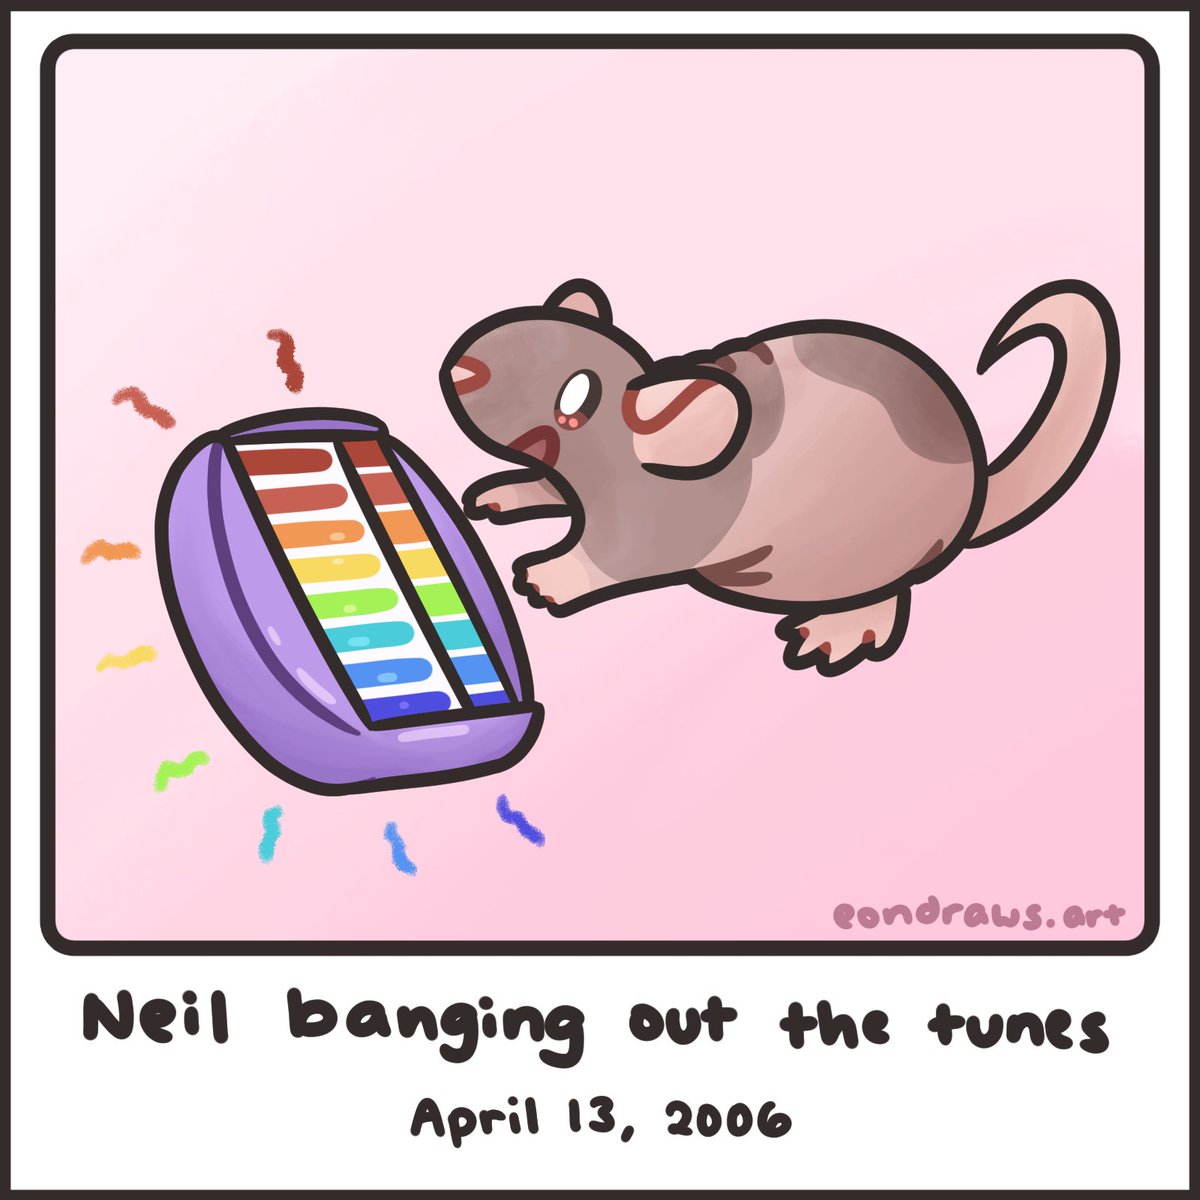 happy anniversary of neil banging out the tunes! :D